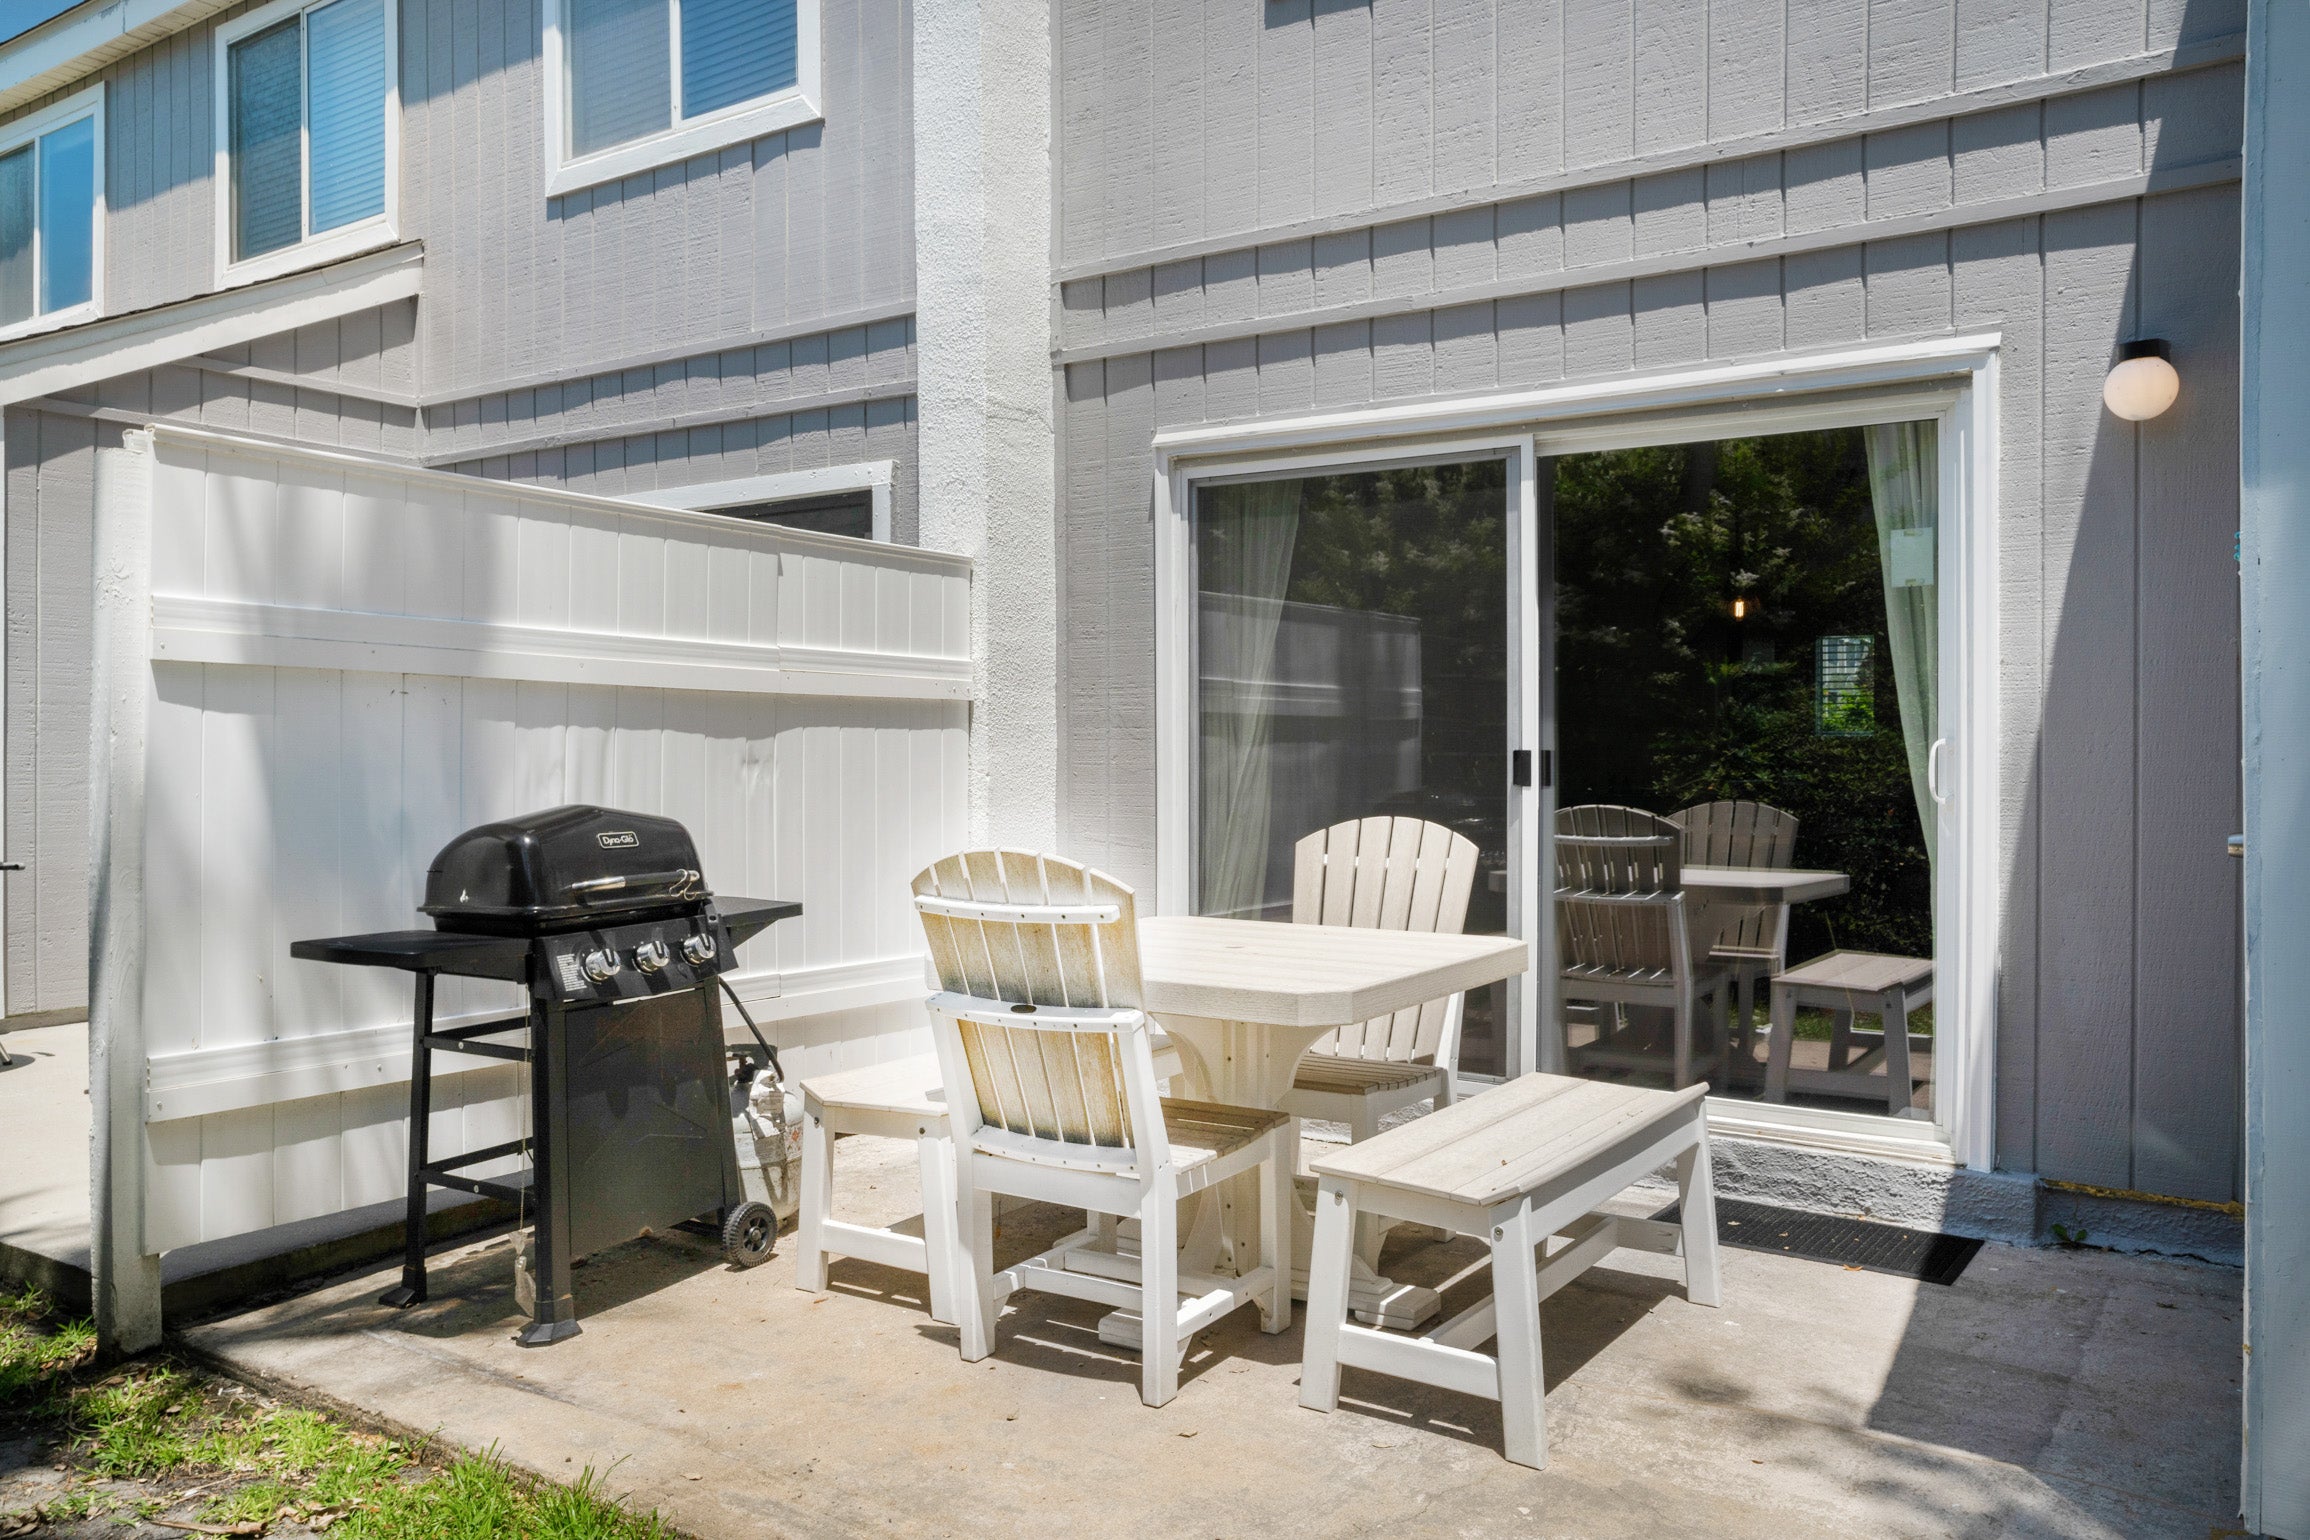 Private patio with grill